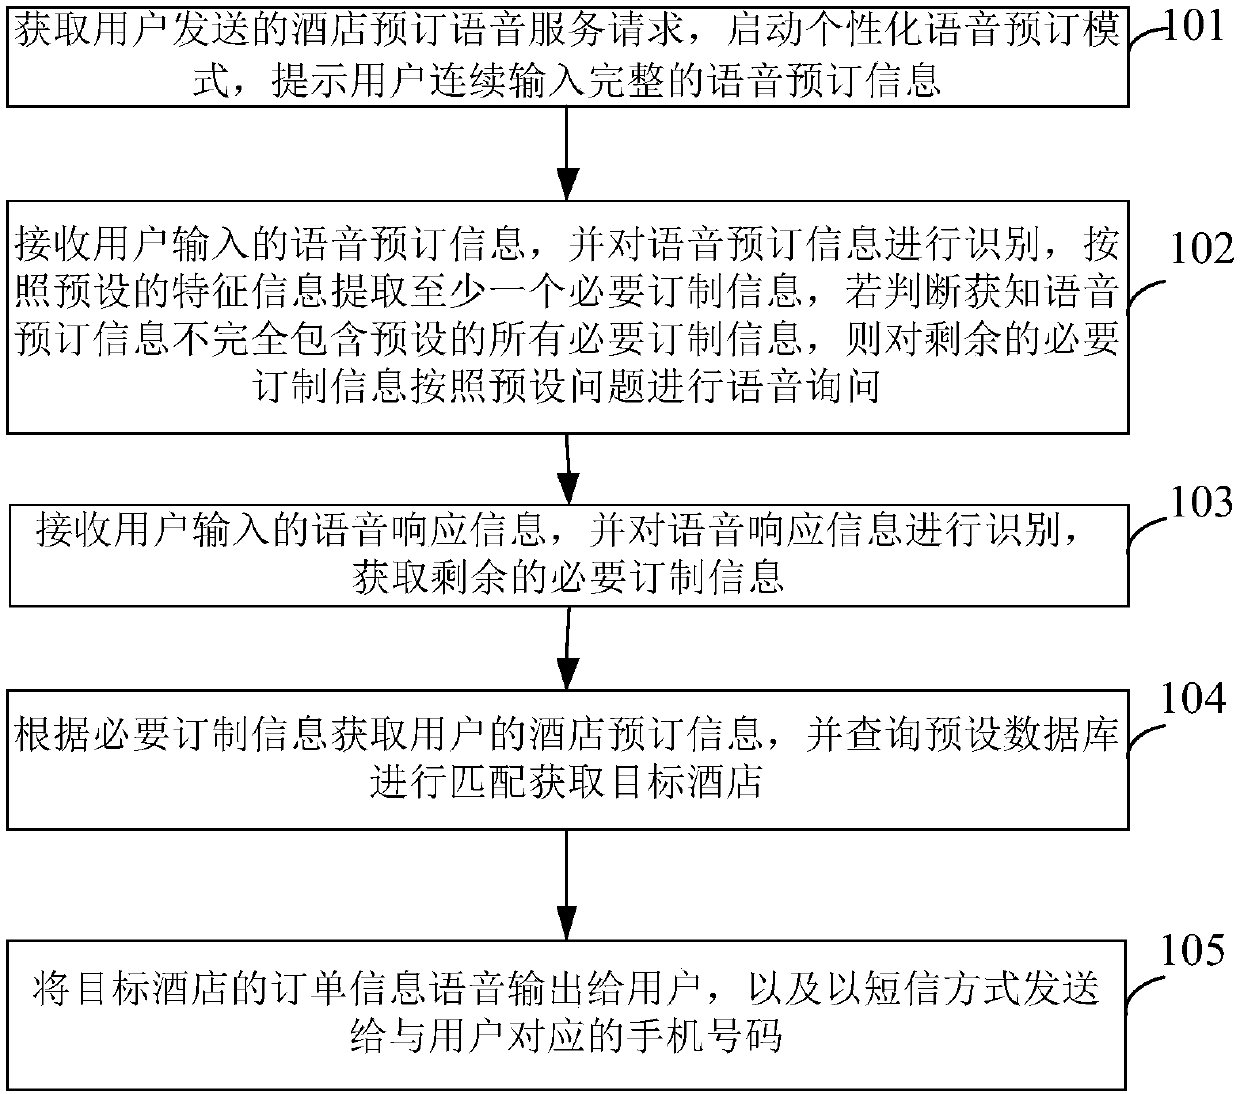 Multi-round voice interaction-based hotel reservation method, device and equipment